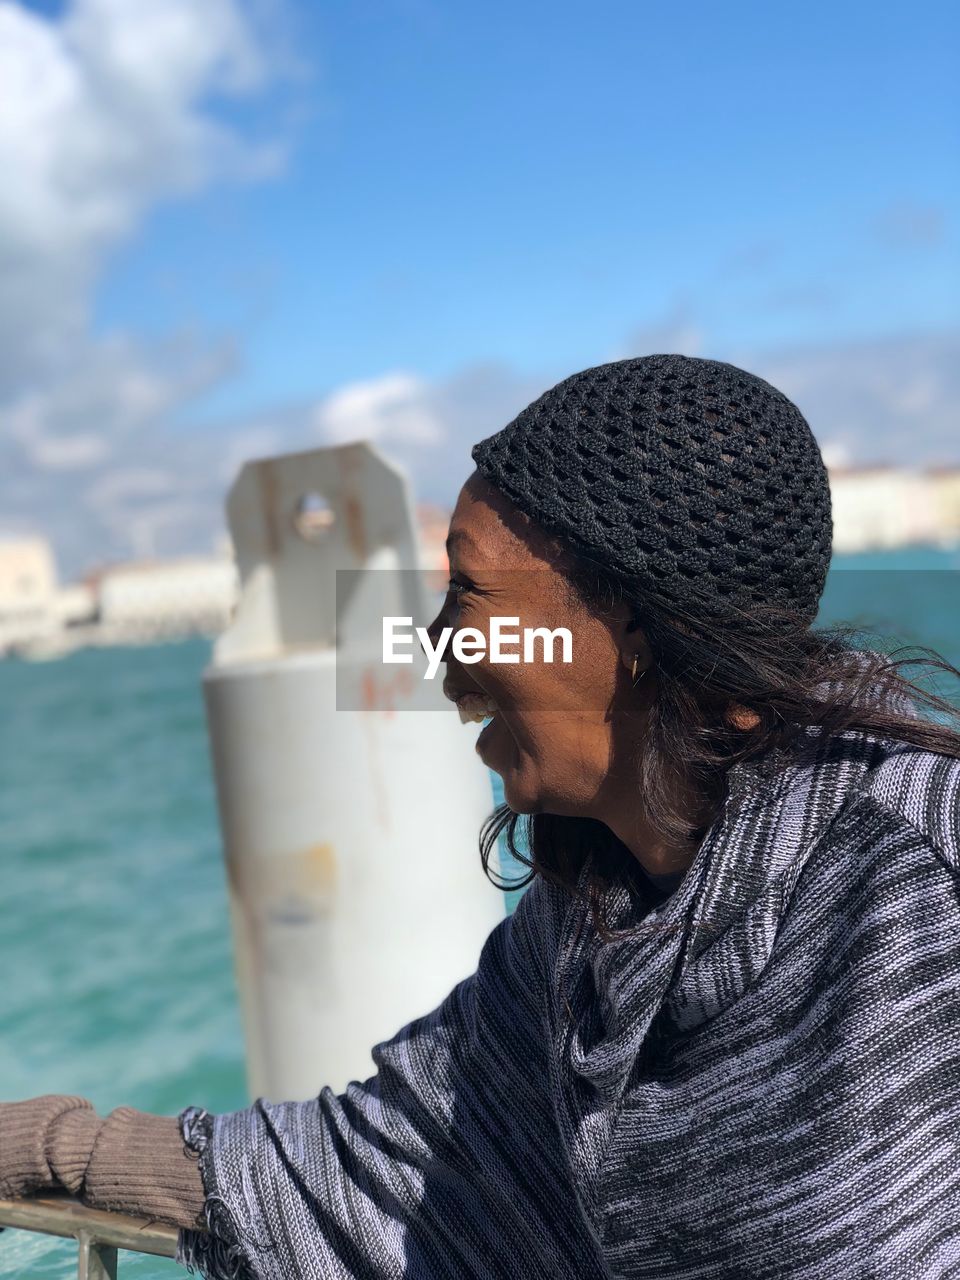 Smiling woman wearing knit hat by sea against sky